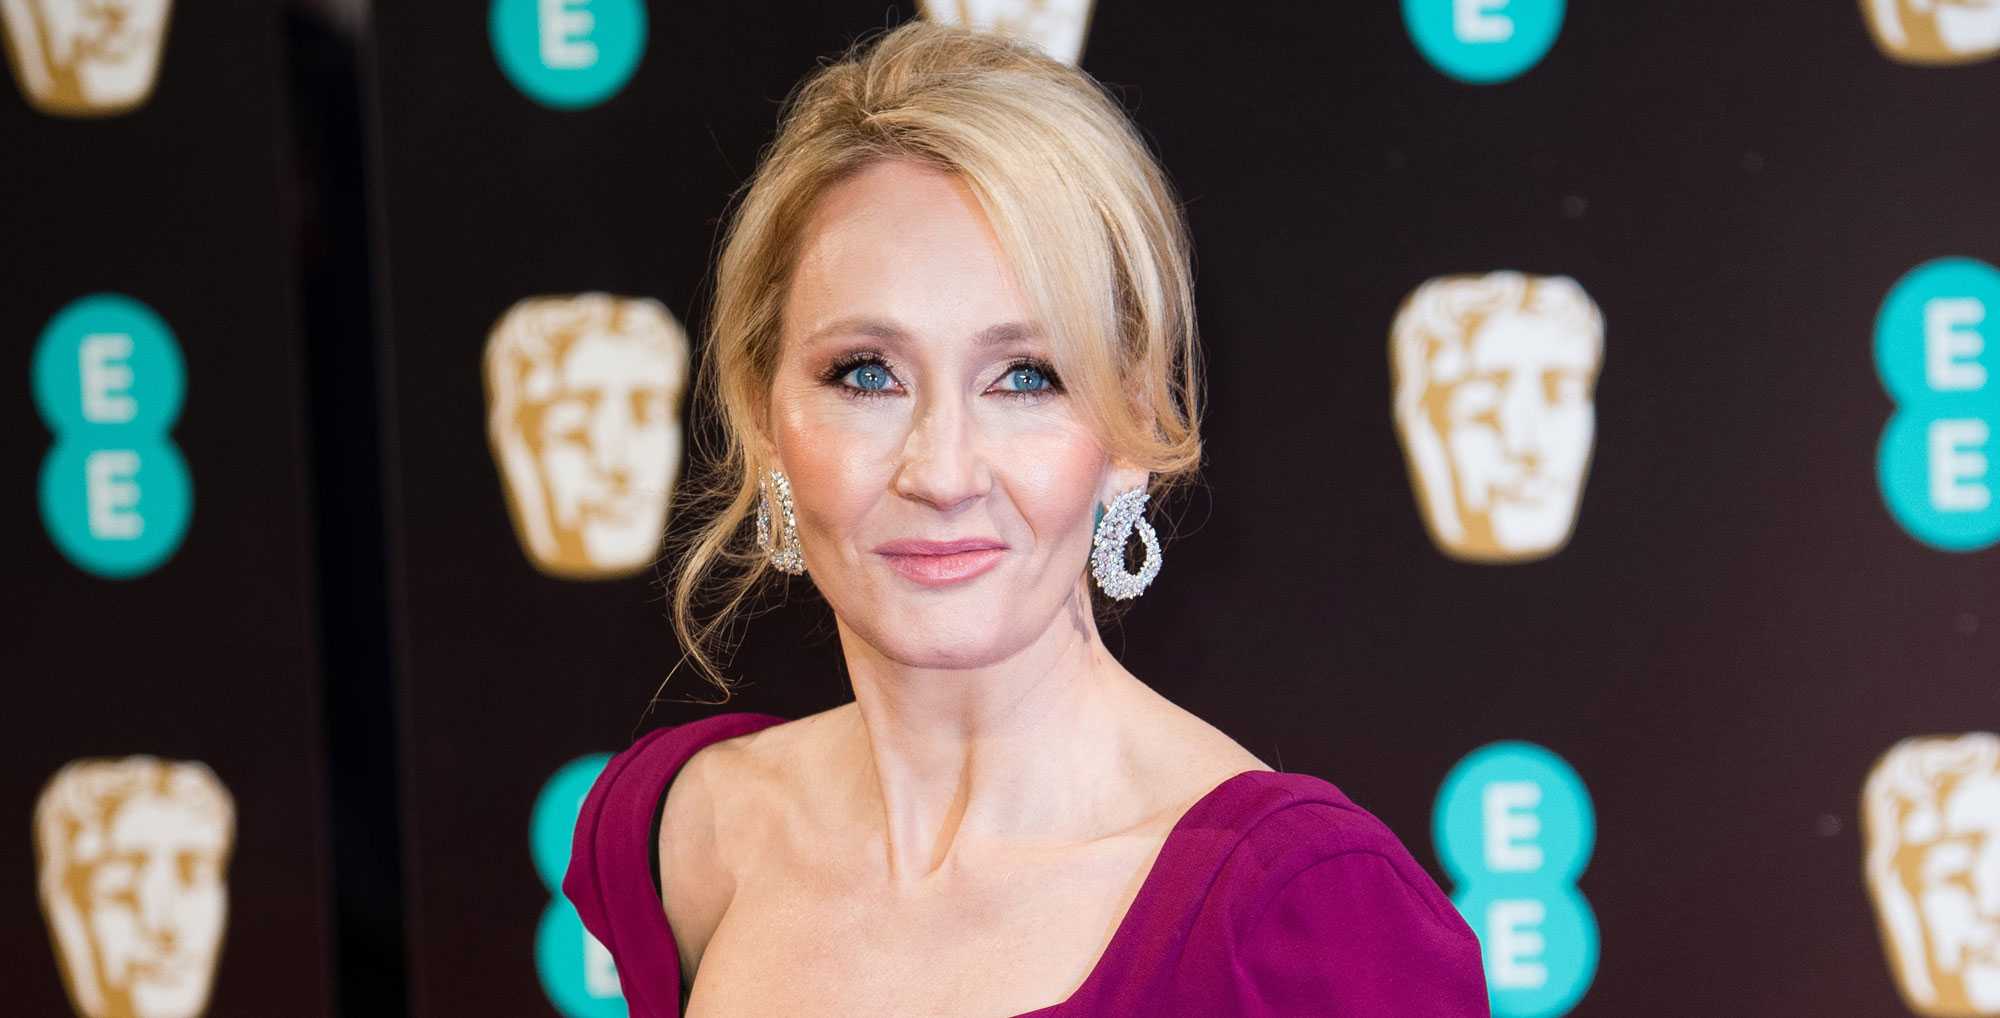 J.K. Rowling marks the 20th anniversary of Harry Potter being published